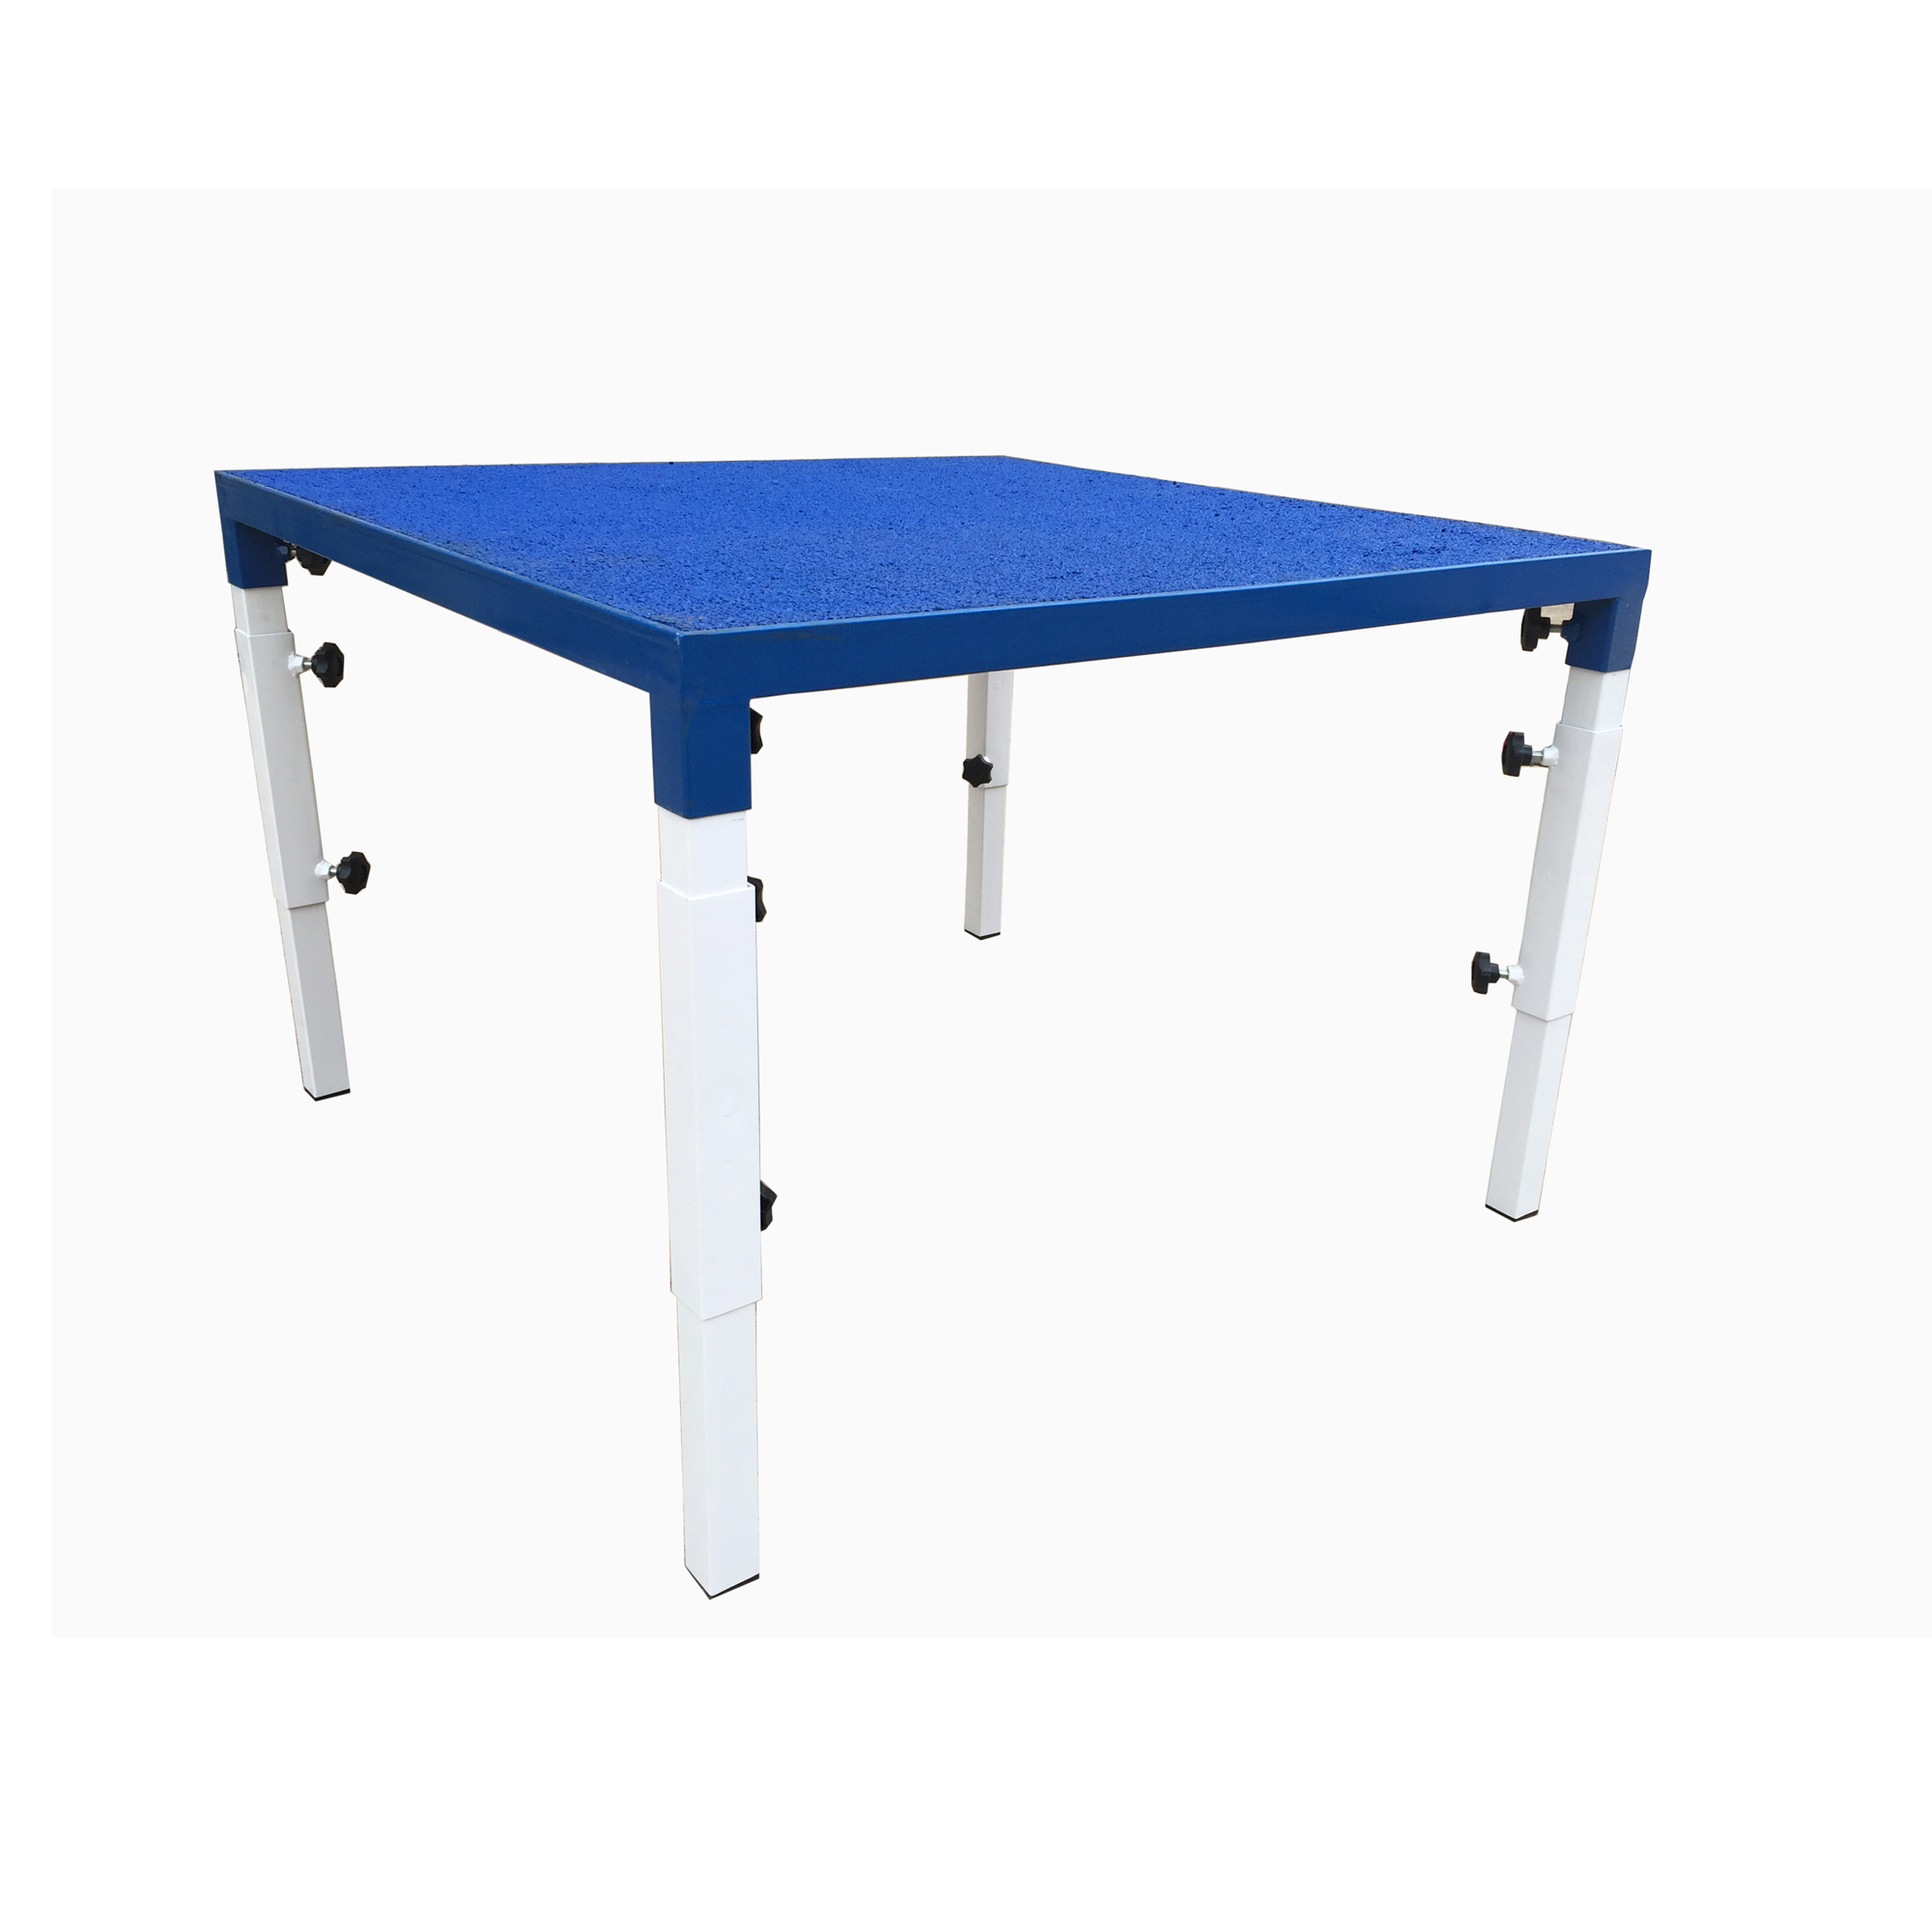 Dog Jumping Table, Pet Jumping Table, Dog Pause Table